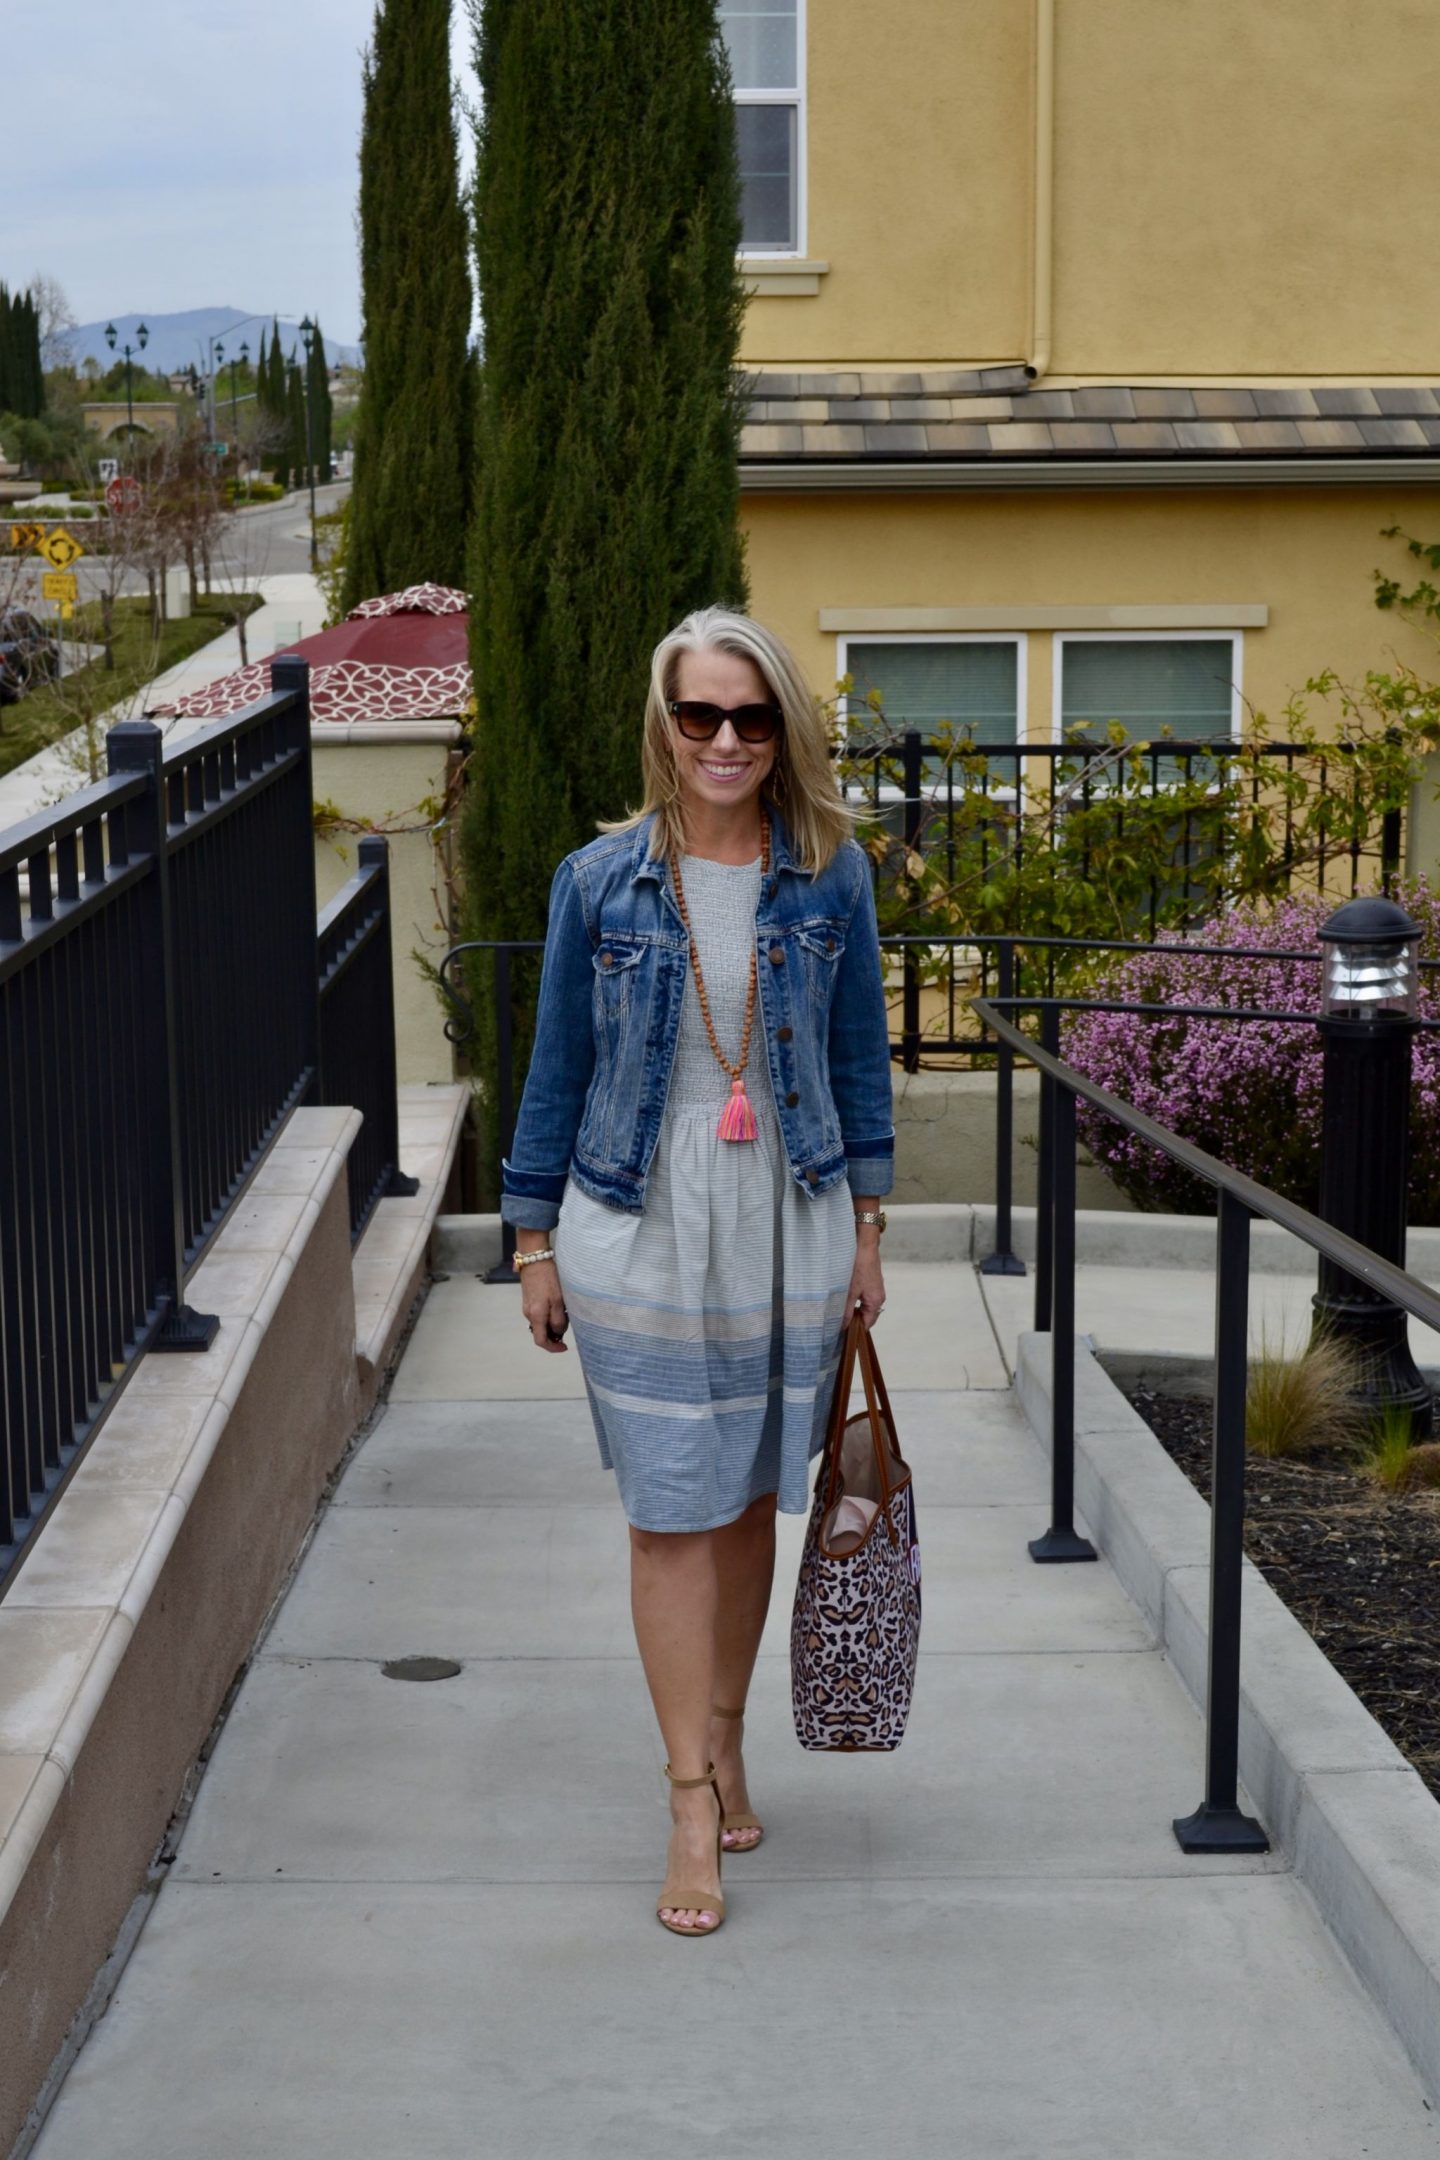 Can a girl ever have enough handbags? #chicandstylish #linkup